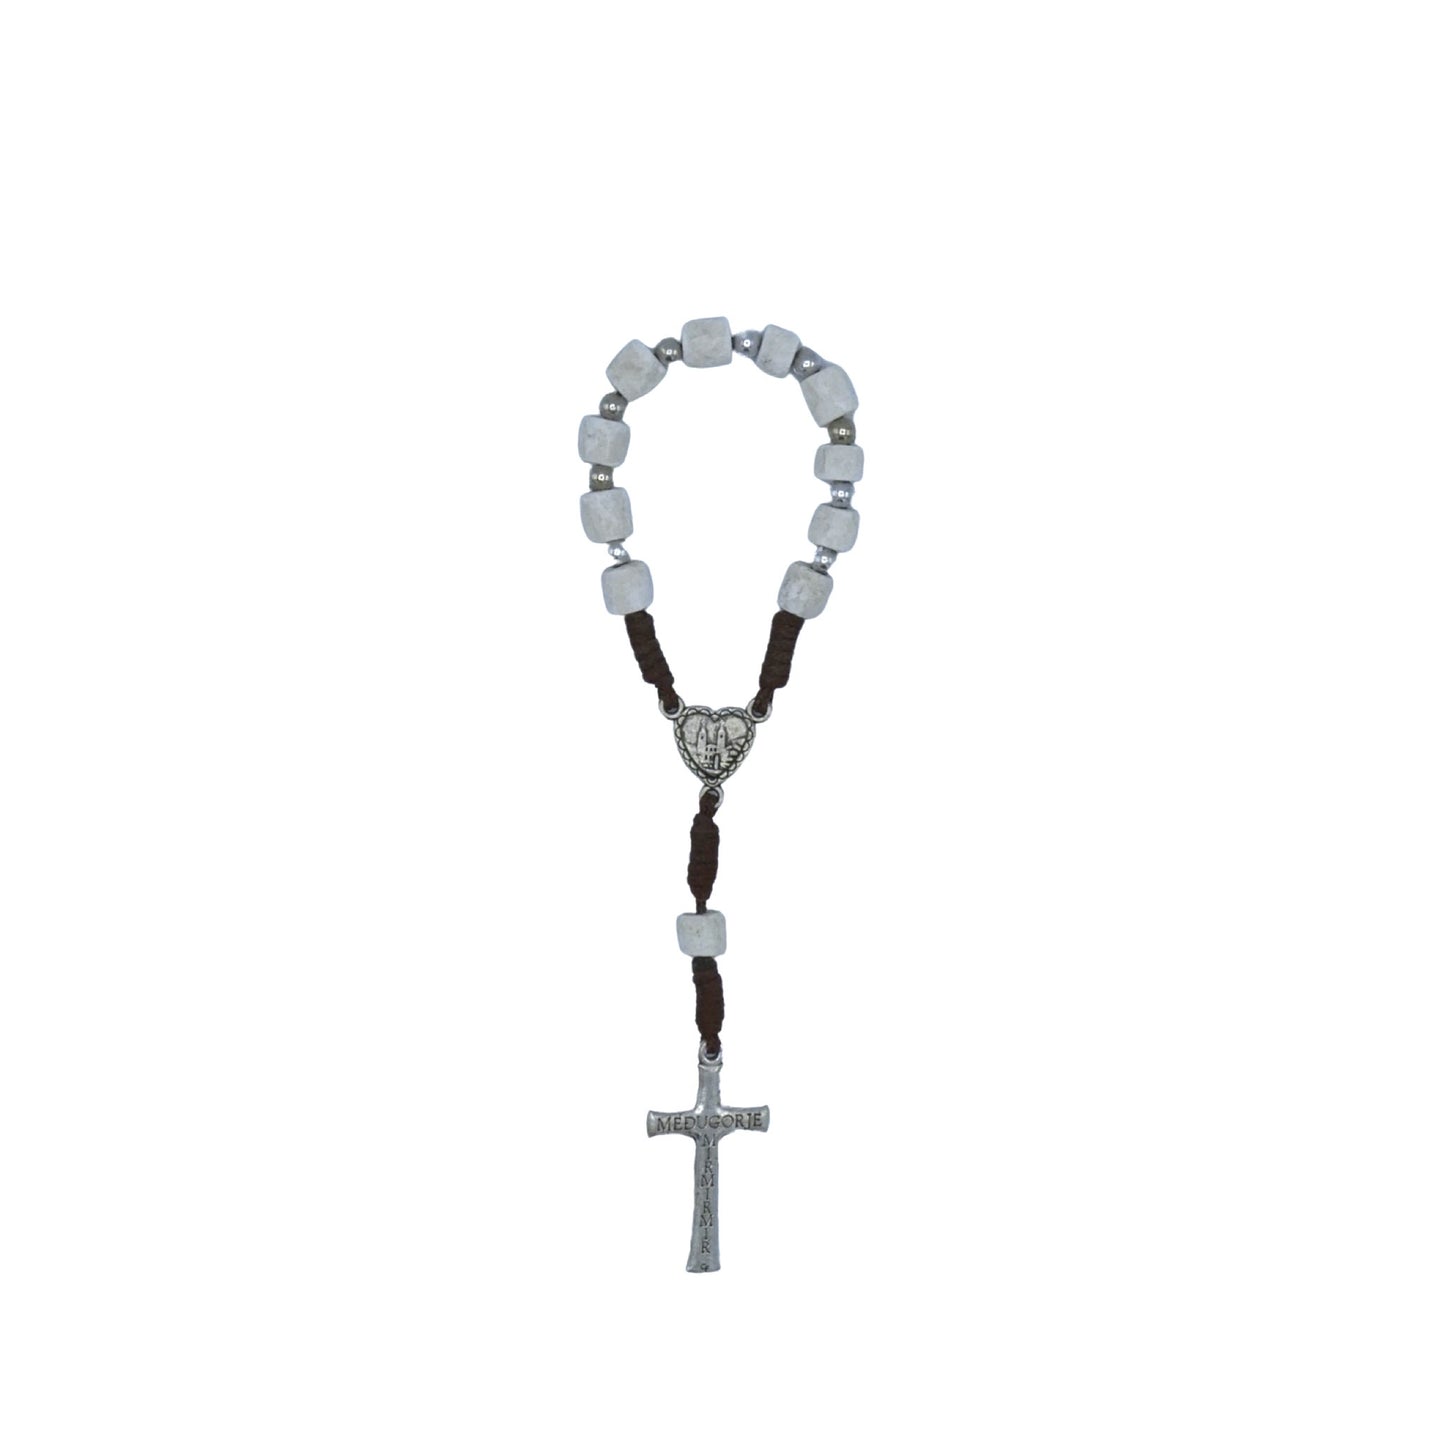 Refined Stone Our Lady Queen of Peace Decade Rosary